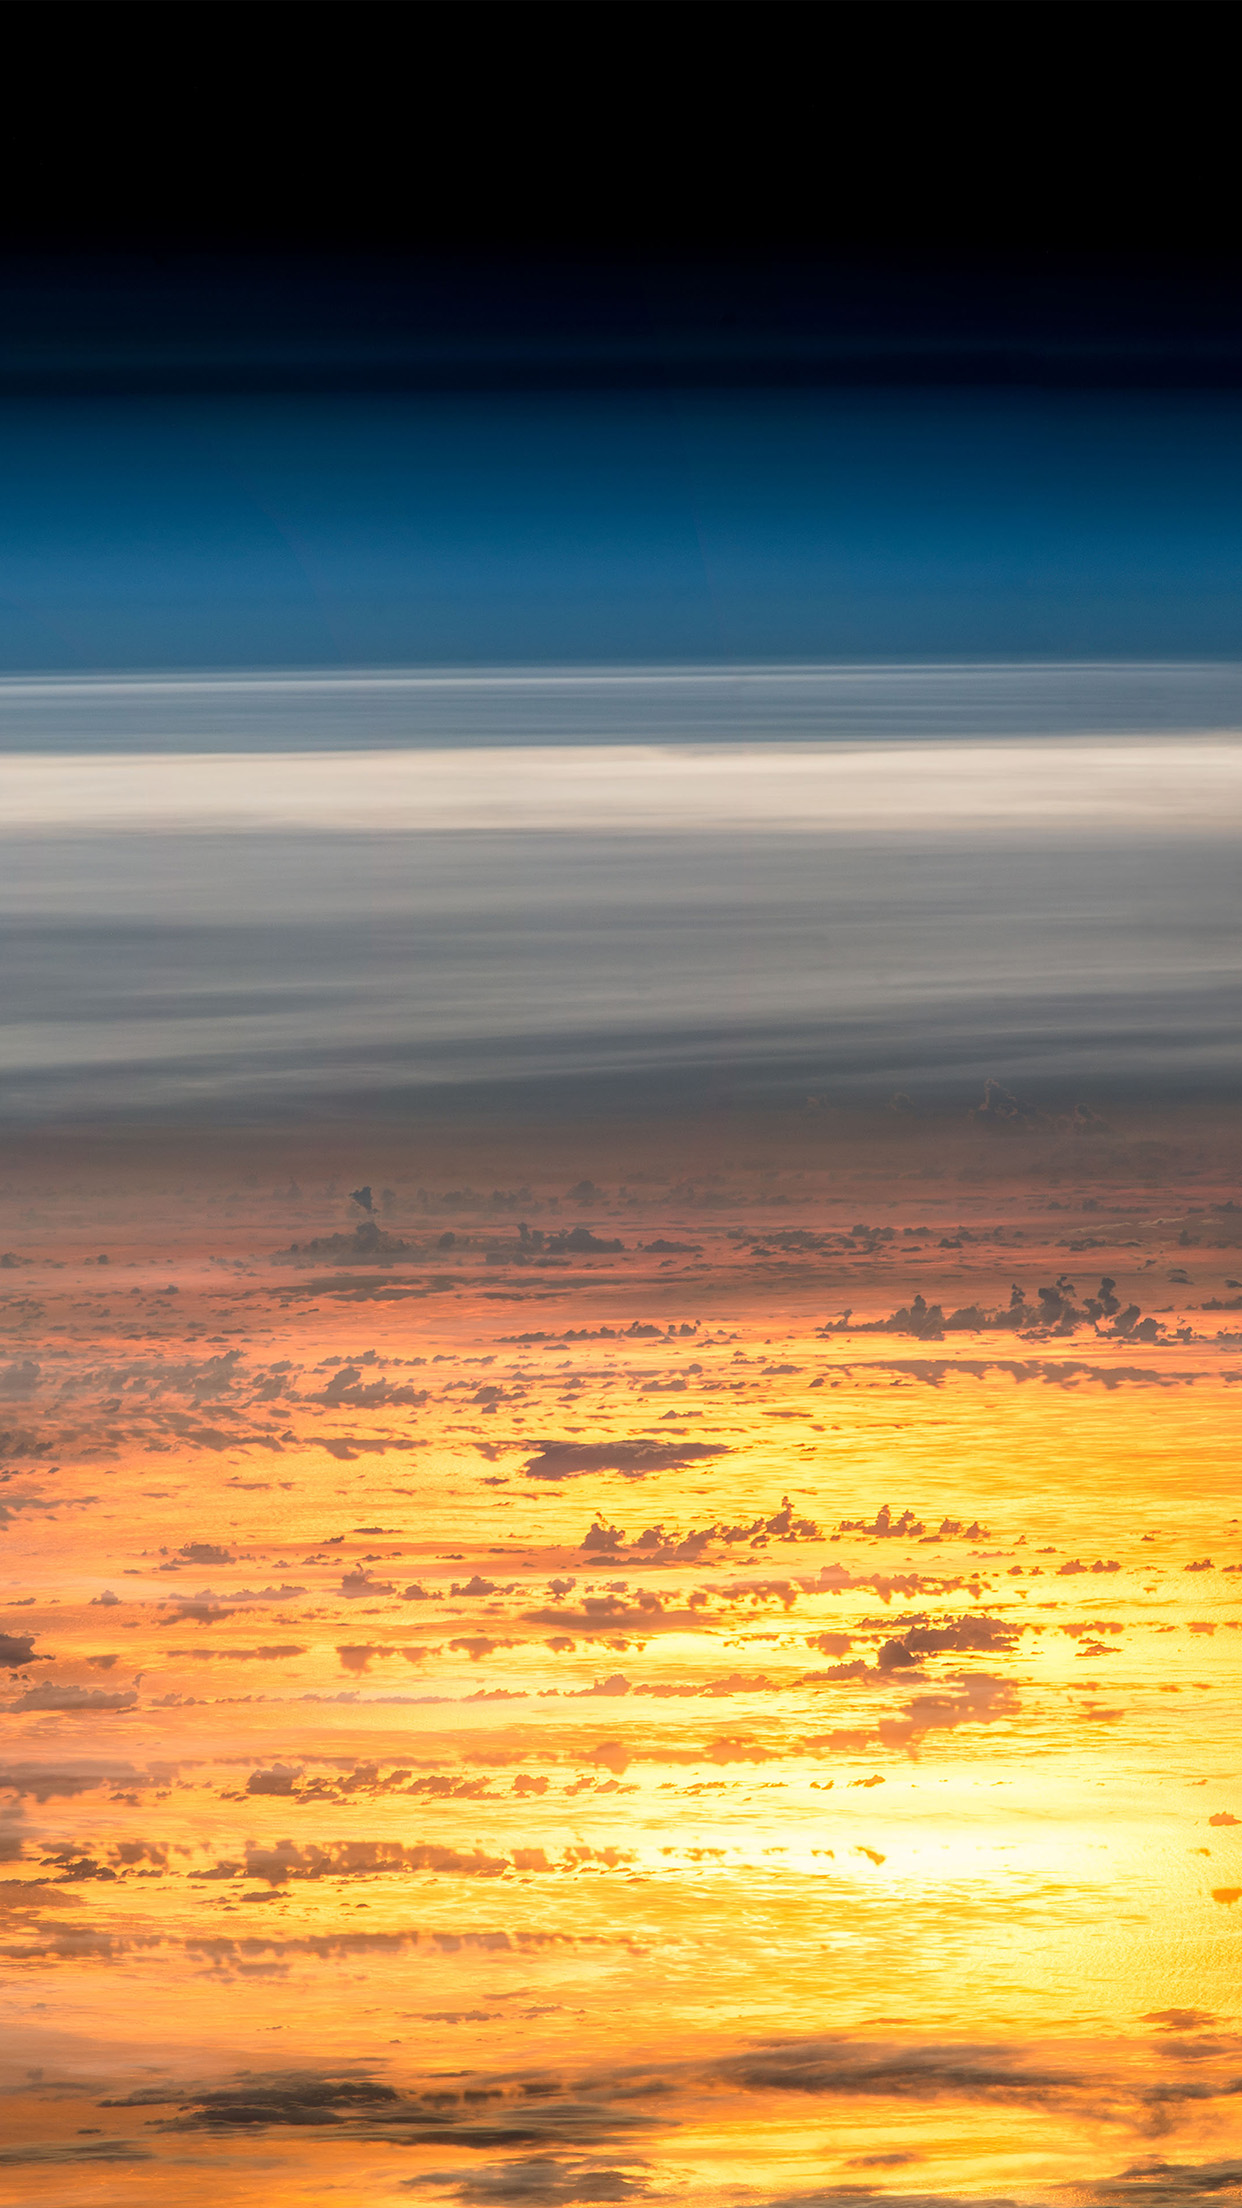 Sunset Sky From Space Art Earthview Illustration Android wallpaper